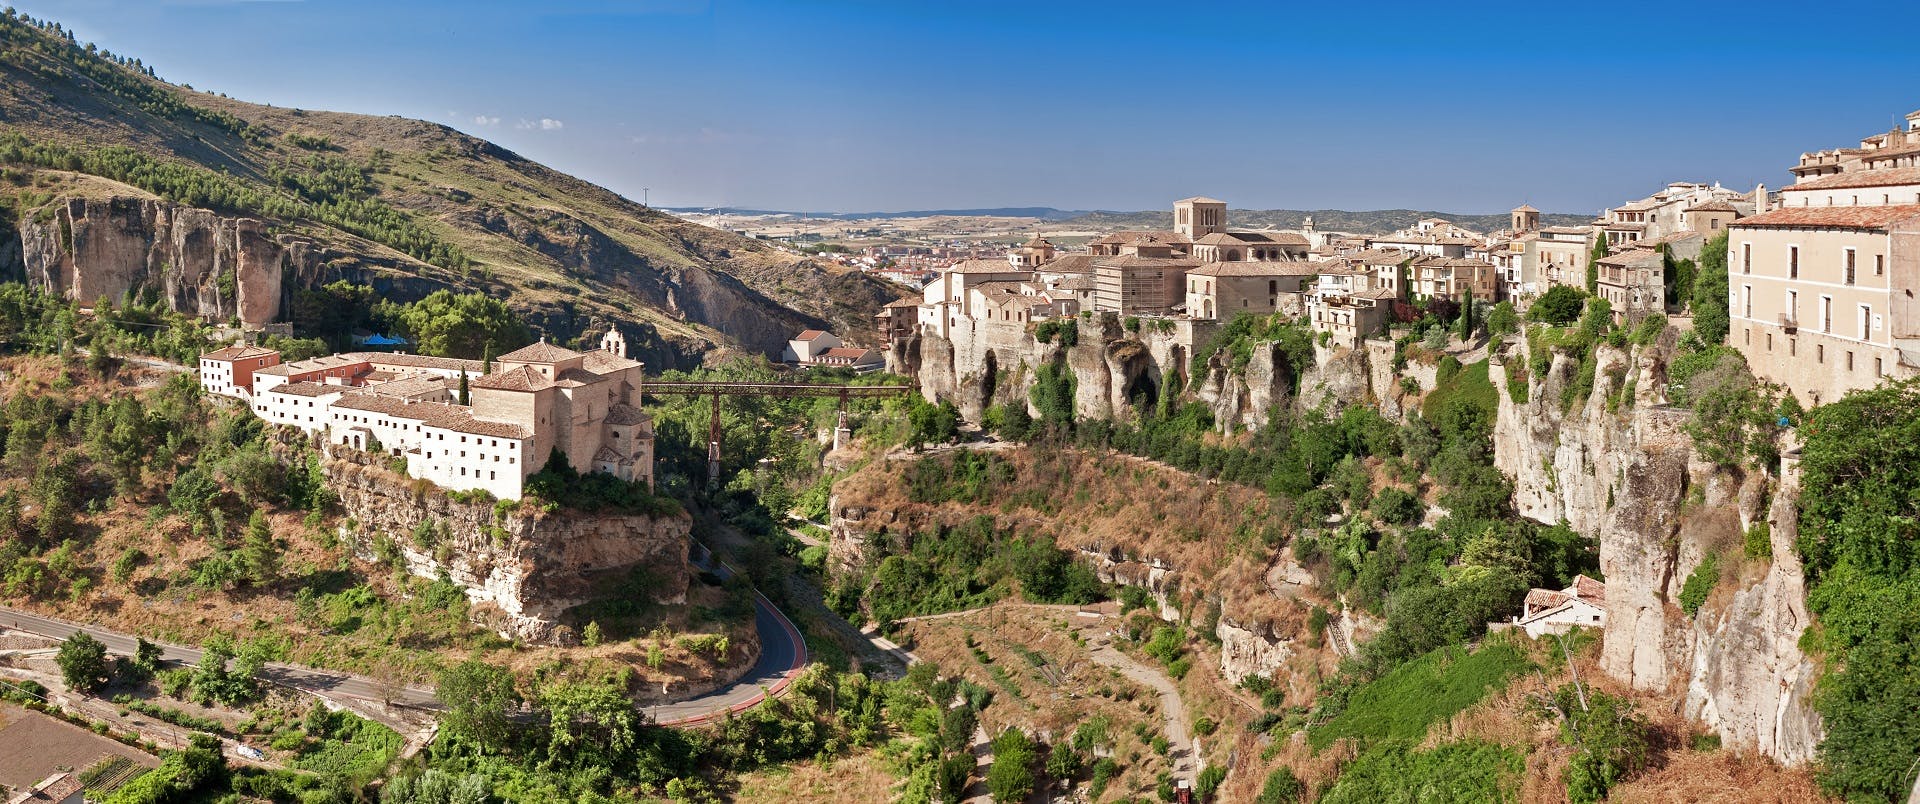 Cuenca's nature and city tour from Madrid Musement